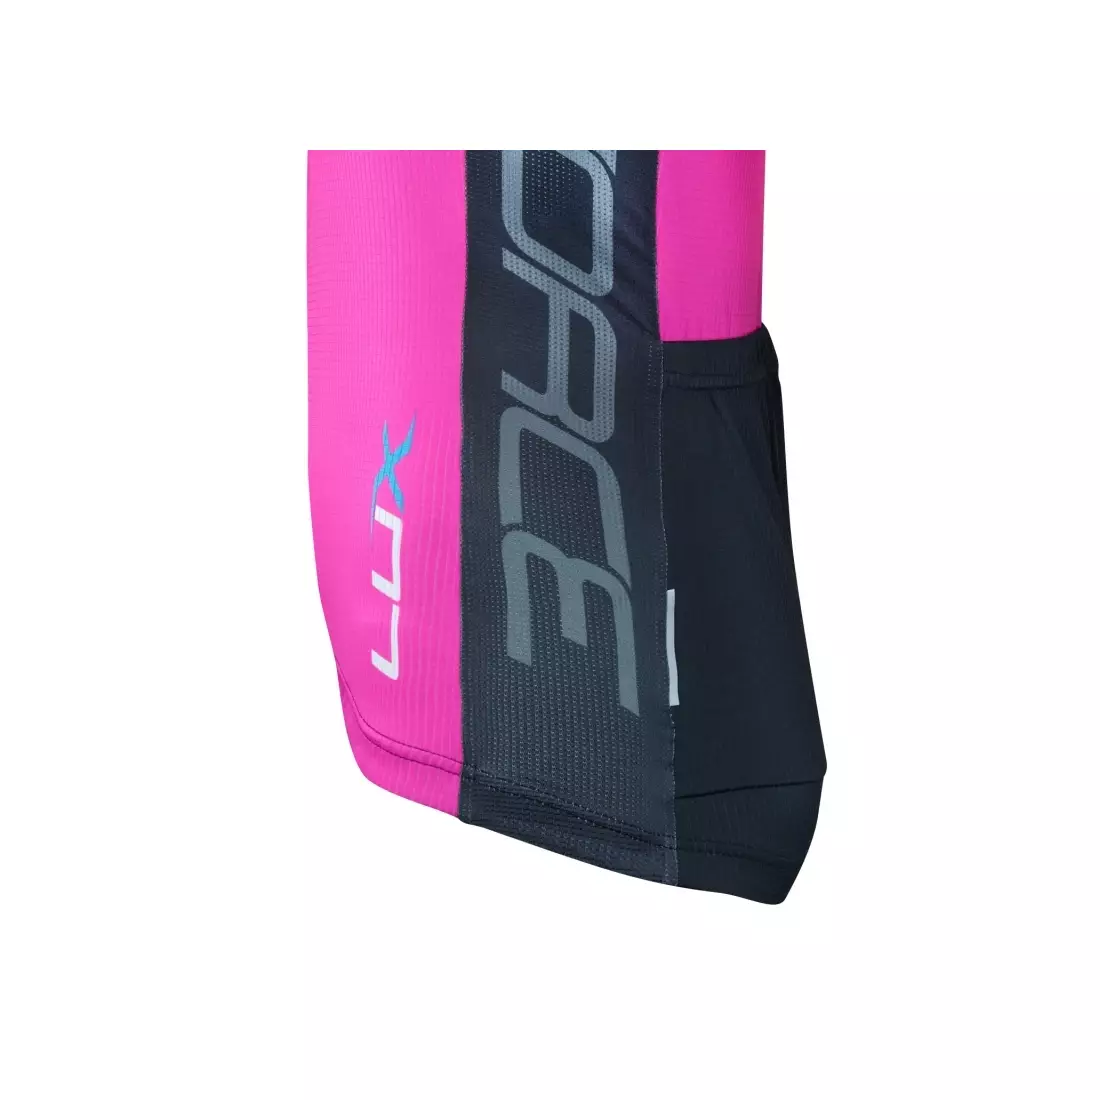 FORCE LUX women's cycling jersey 900132, color: pink